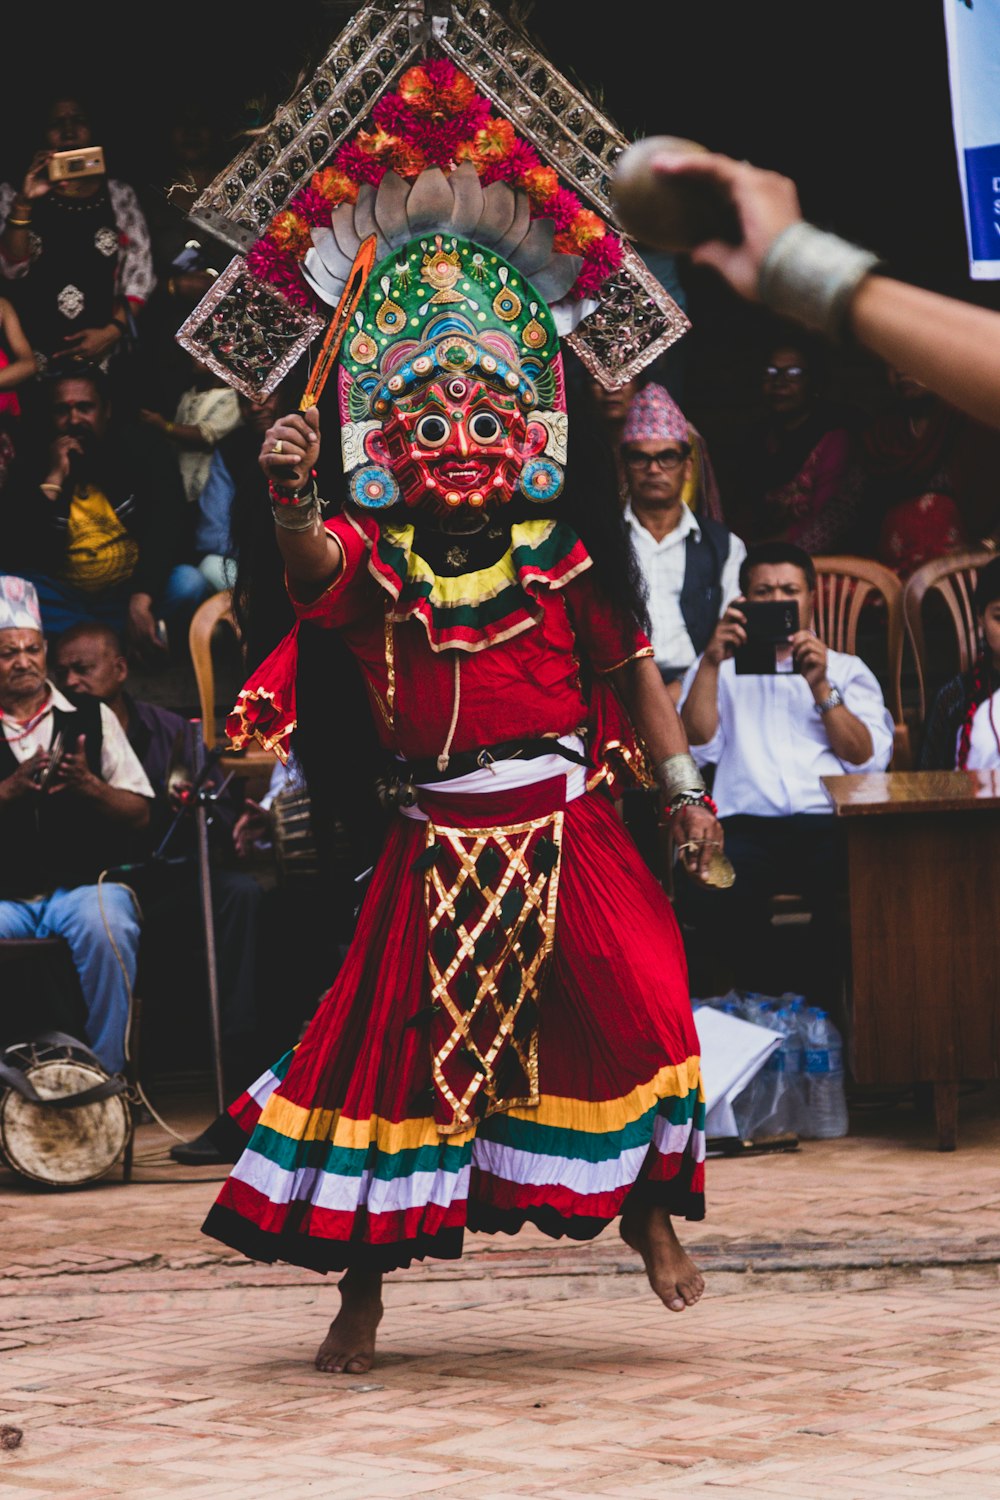 a person in a costume performing a dance in front of a crowd